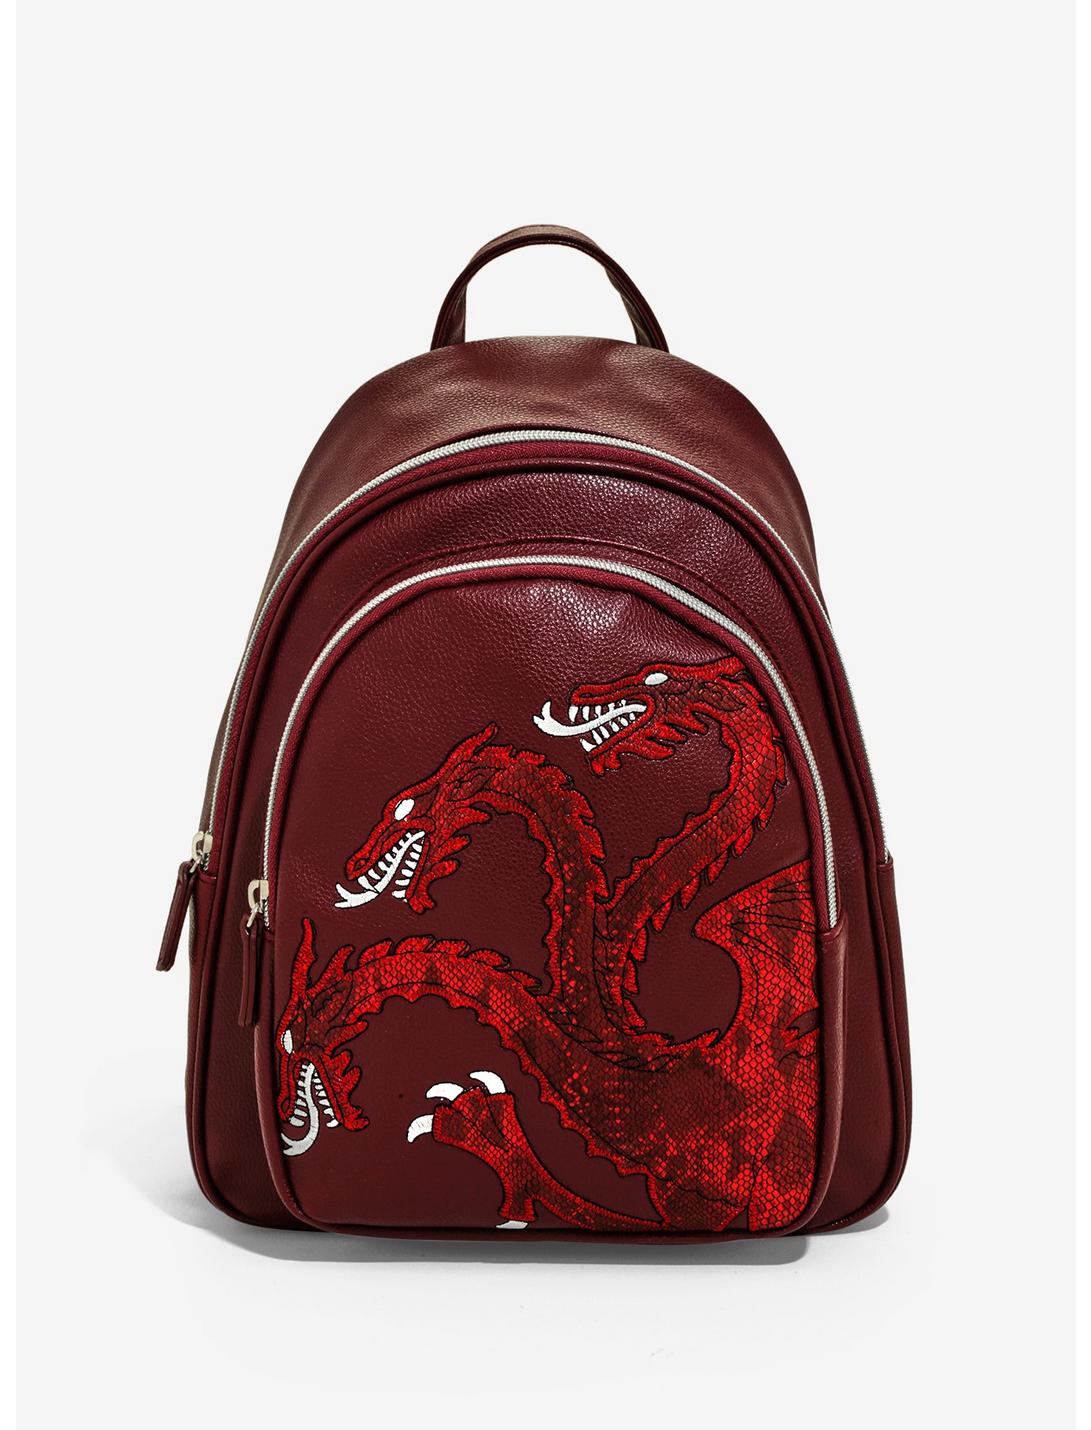 Danielle Nicole Game Of Thrones House Targaryen Mini Backpack - BoxLunch Exclusive, , hi-res